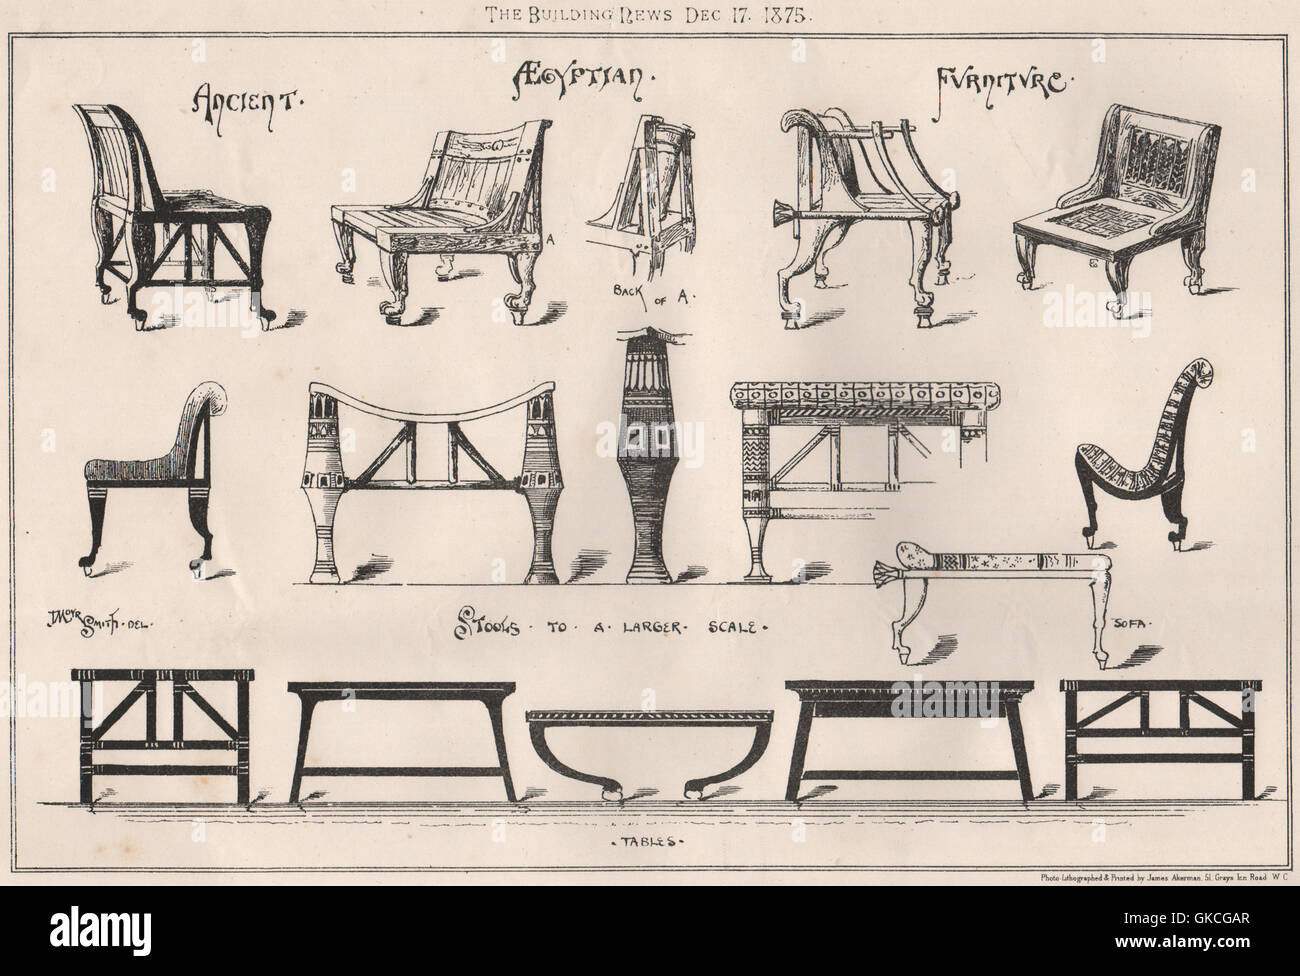 Ancient Egyptian Furniture 2 Antique Print 1875 Stock Photo